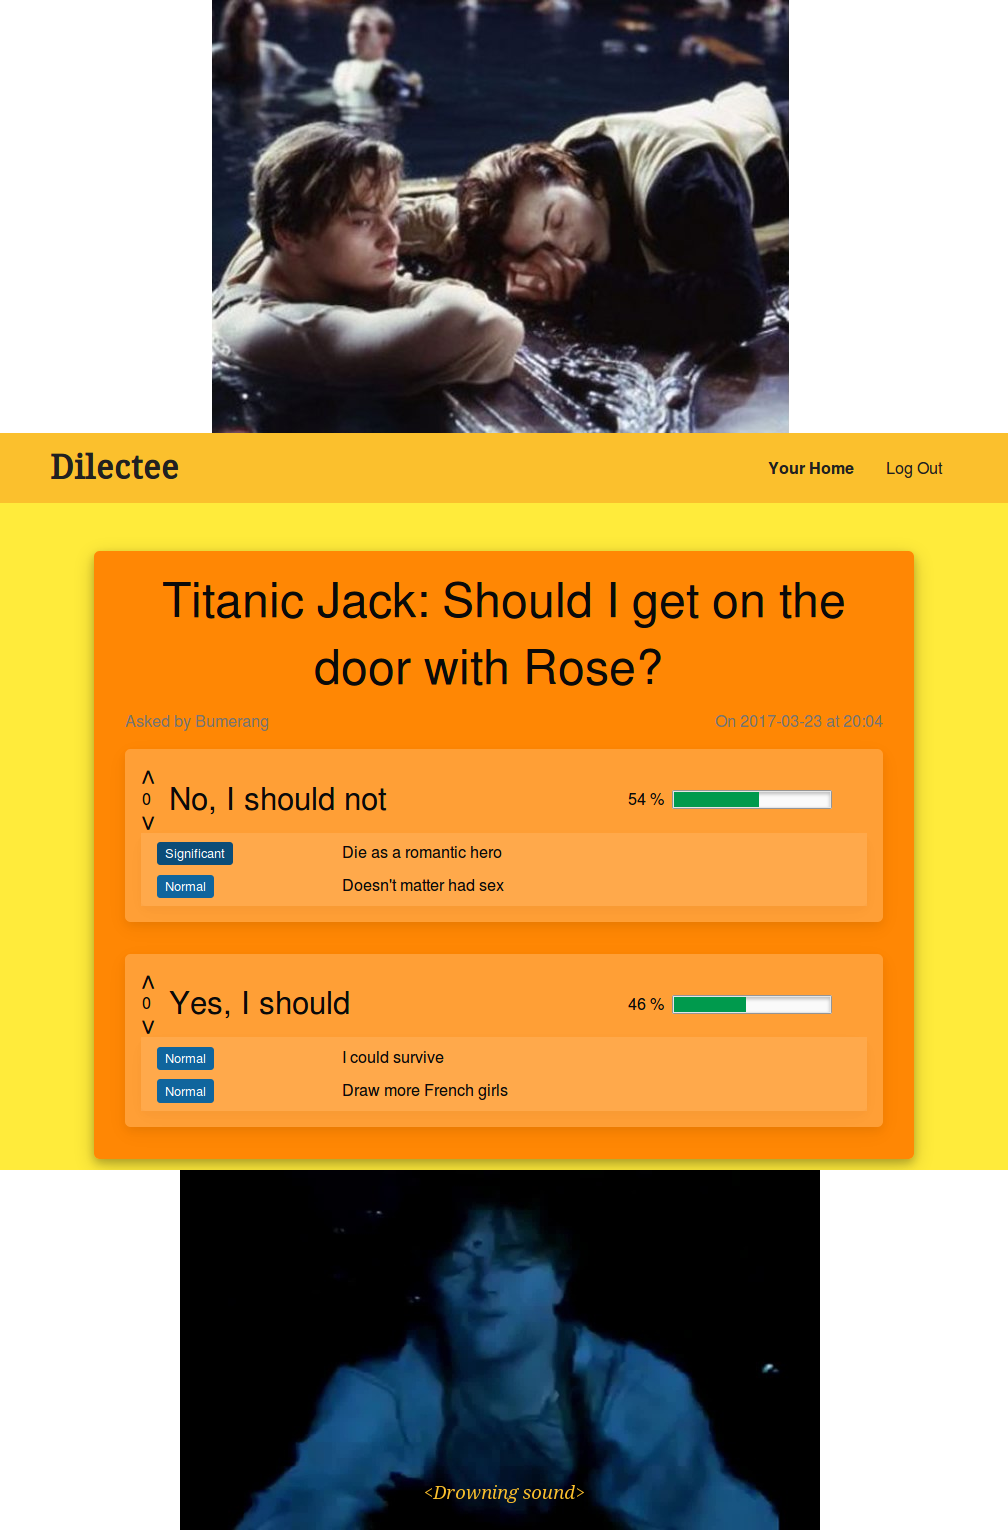 Easy decision for Jack